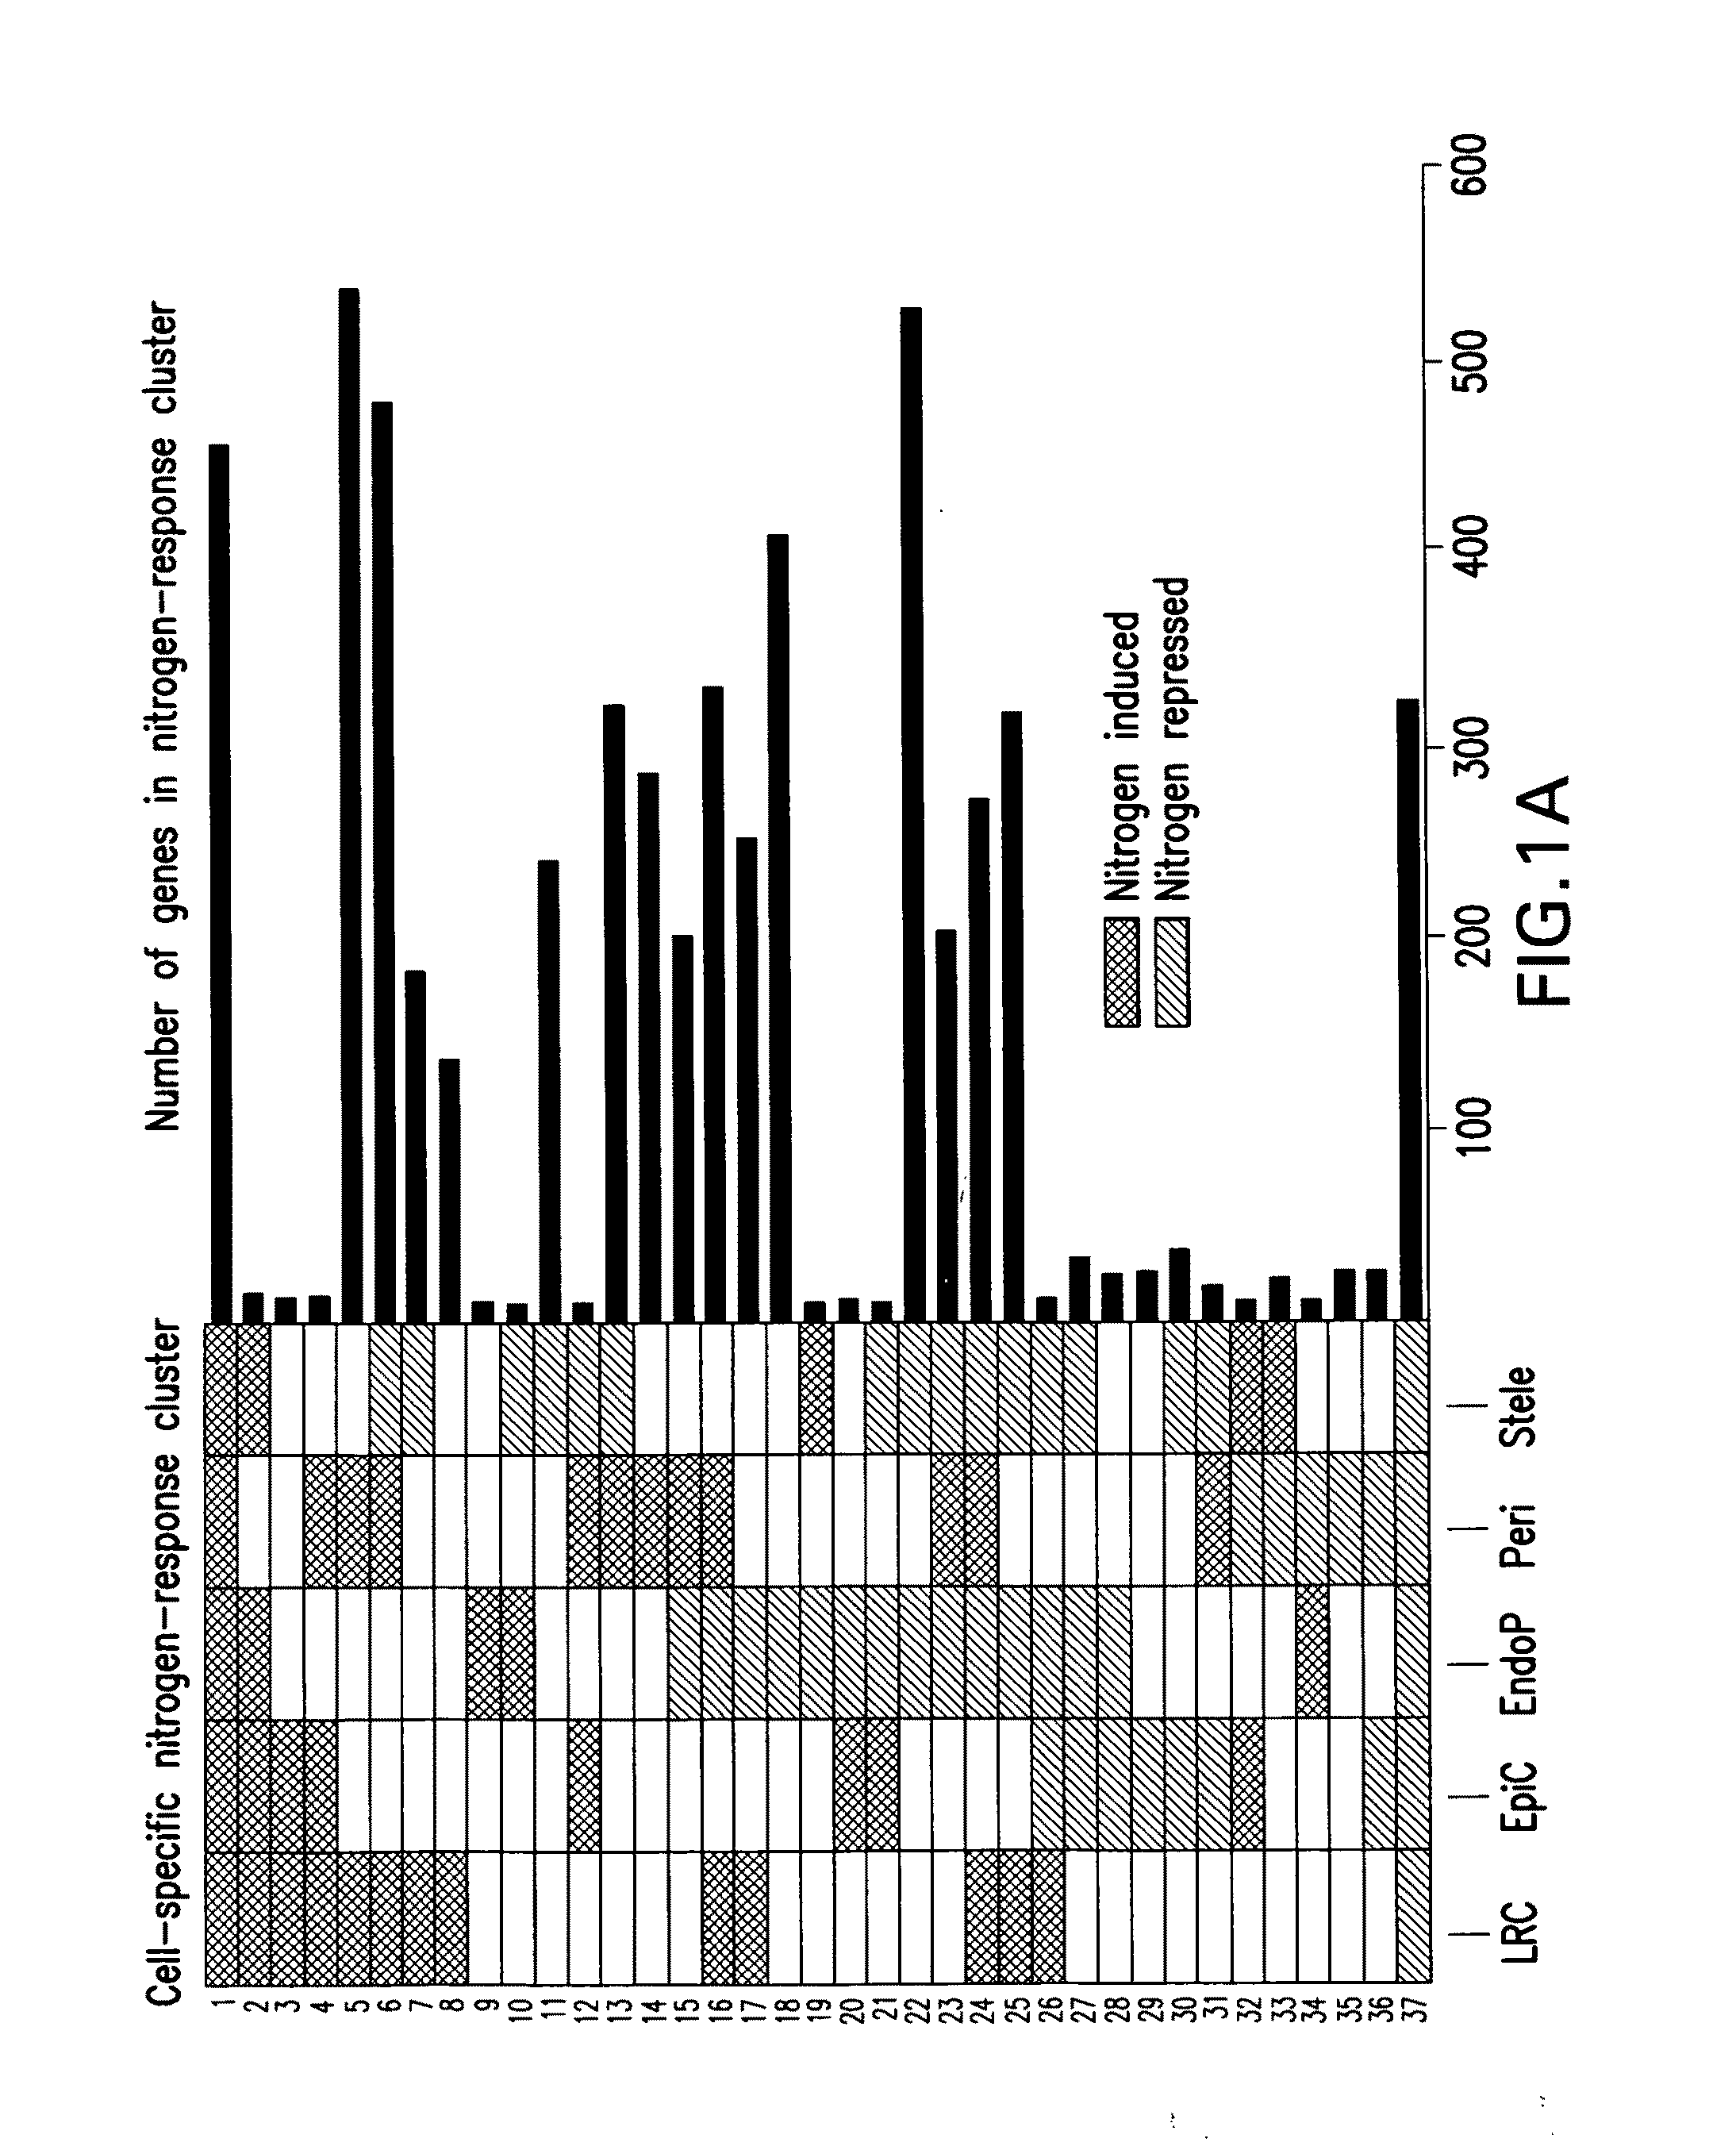 Methods of affecting plant growth with microRNA